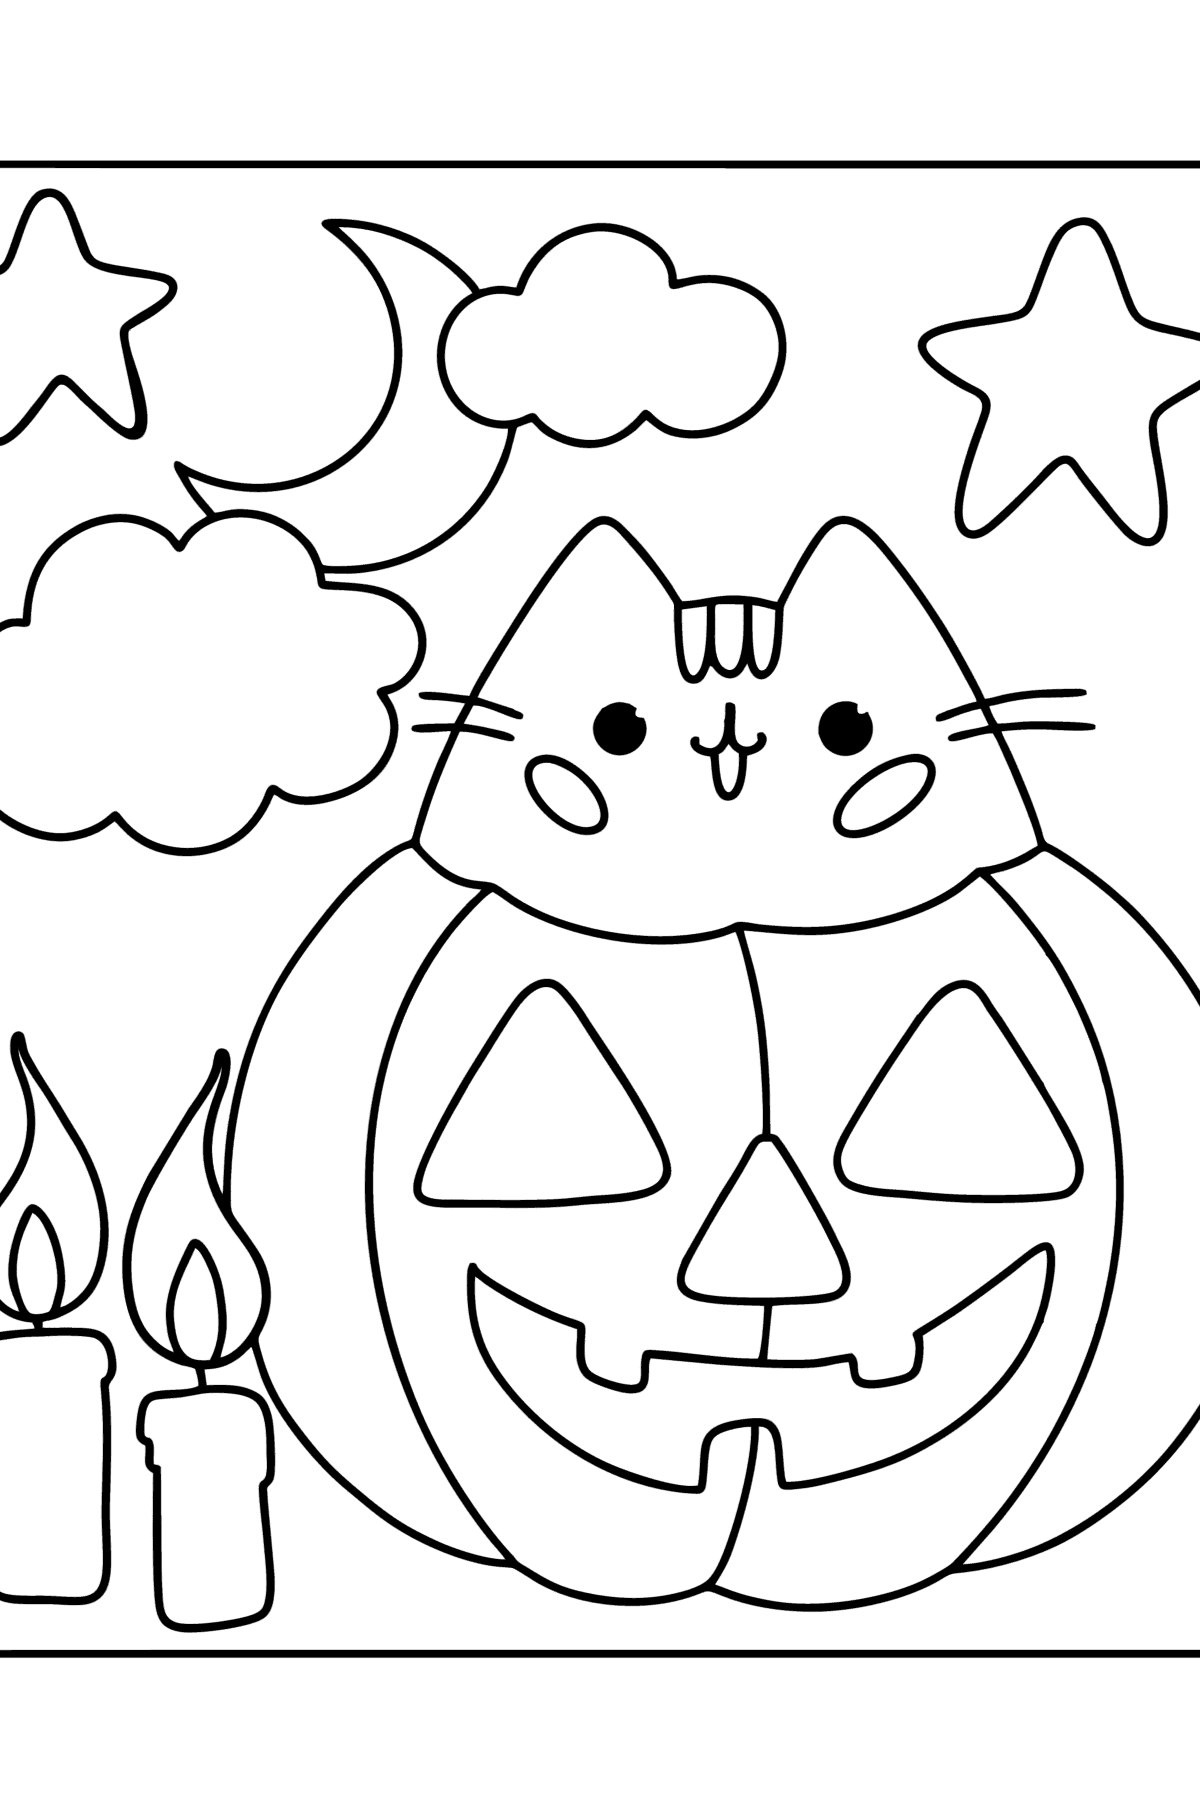 Pusheen and halloween сoloring page - Coloring Pages for Kids